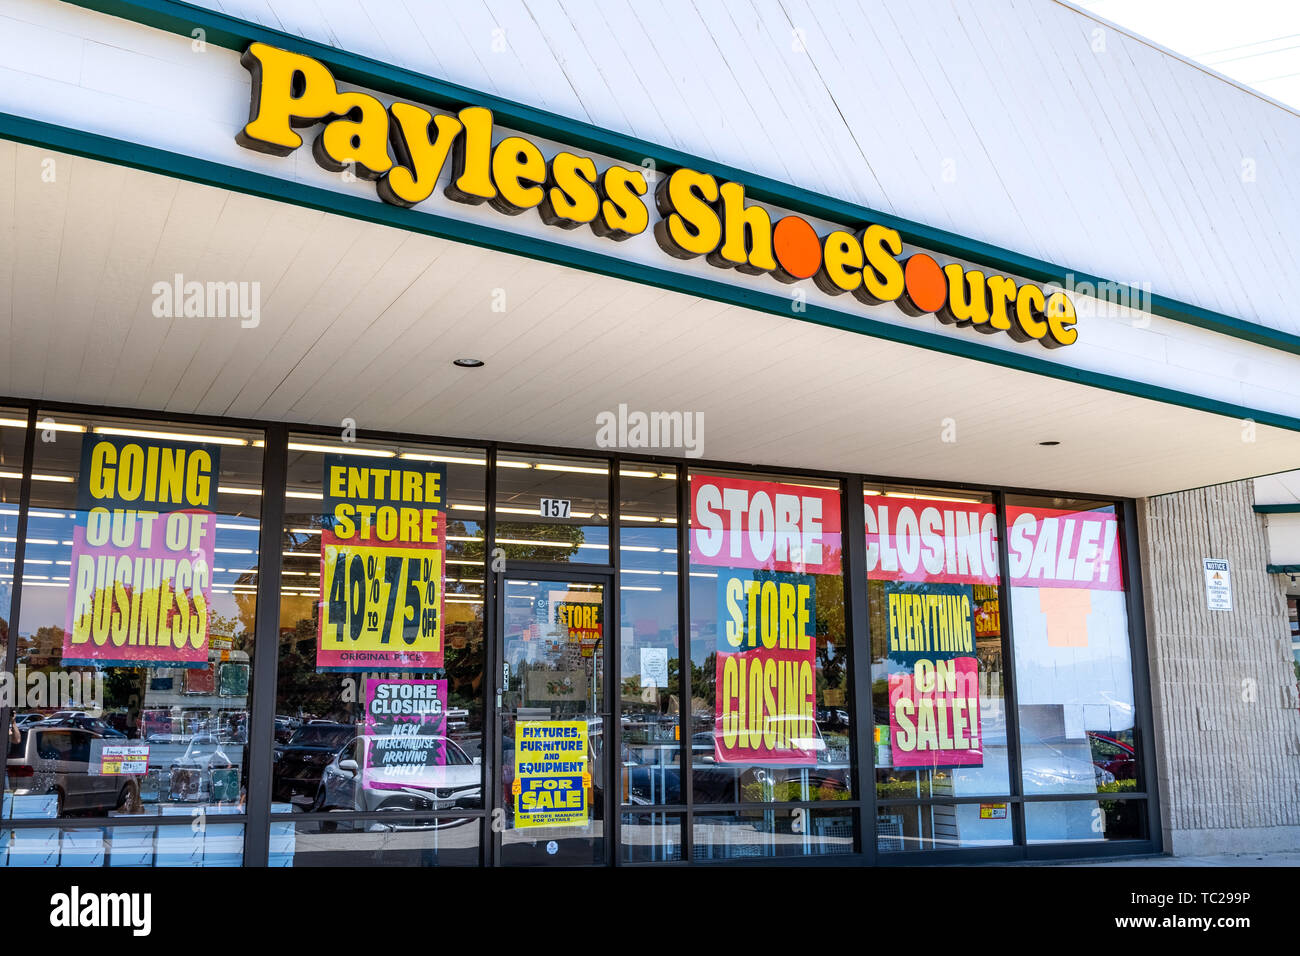 June 1, 2019 Sunnyvale / CA / USA - Payless Shoesource store with 'Store Closing', 'Entire store 40%-75% off', 'Everything on sale' and 'Going out of  Stock Photo